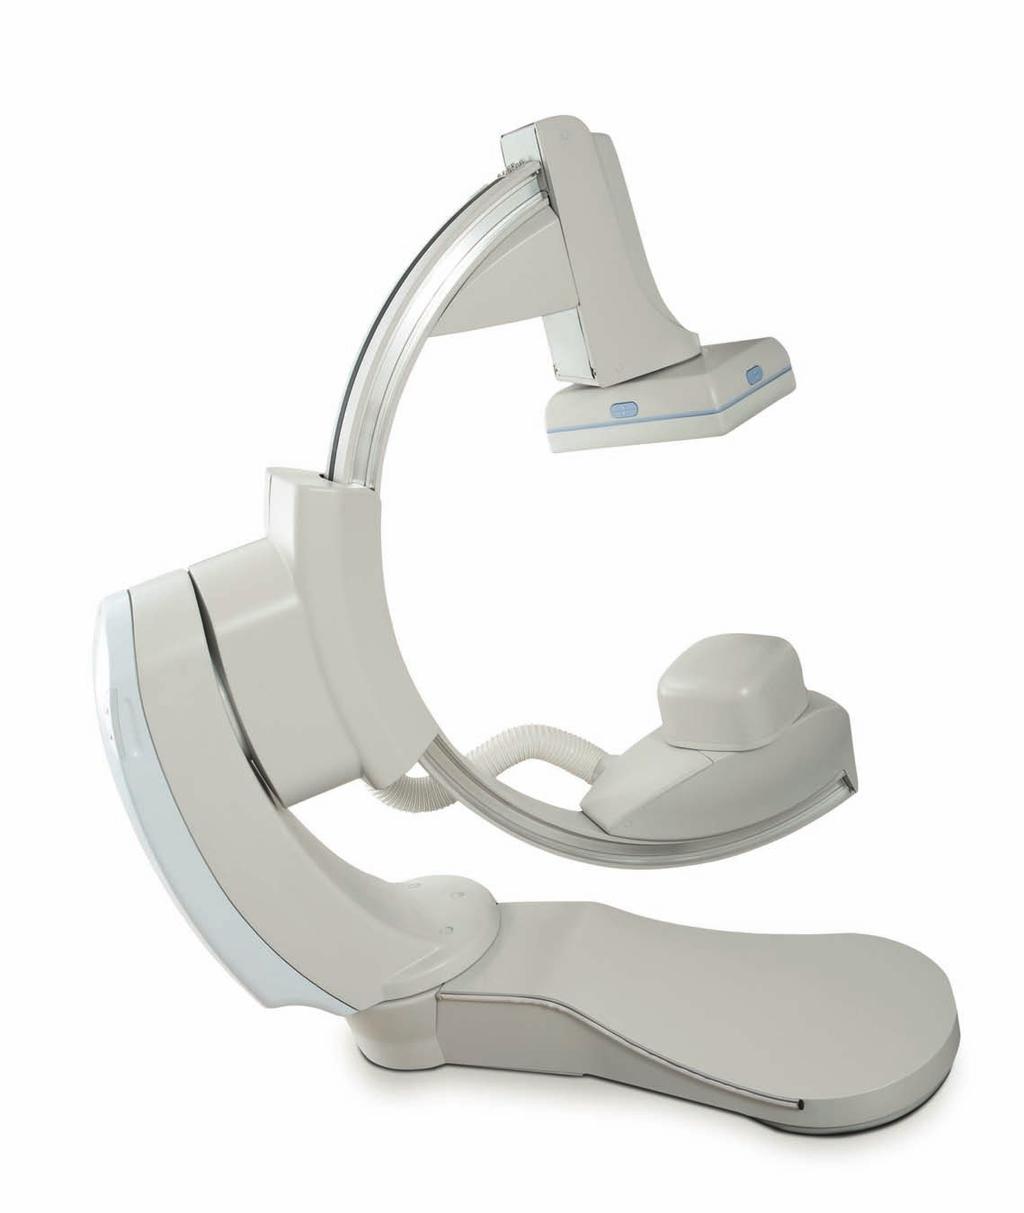 work with unprecedented access other labs cannot match. Unique multi-axis floor and ceiling mounted C-arm positioners are the result of careful study and interaction with leading clinicians.